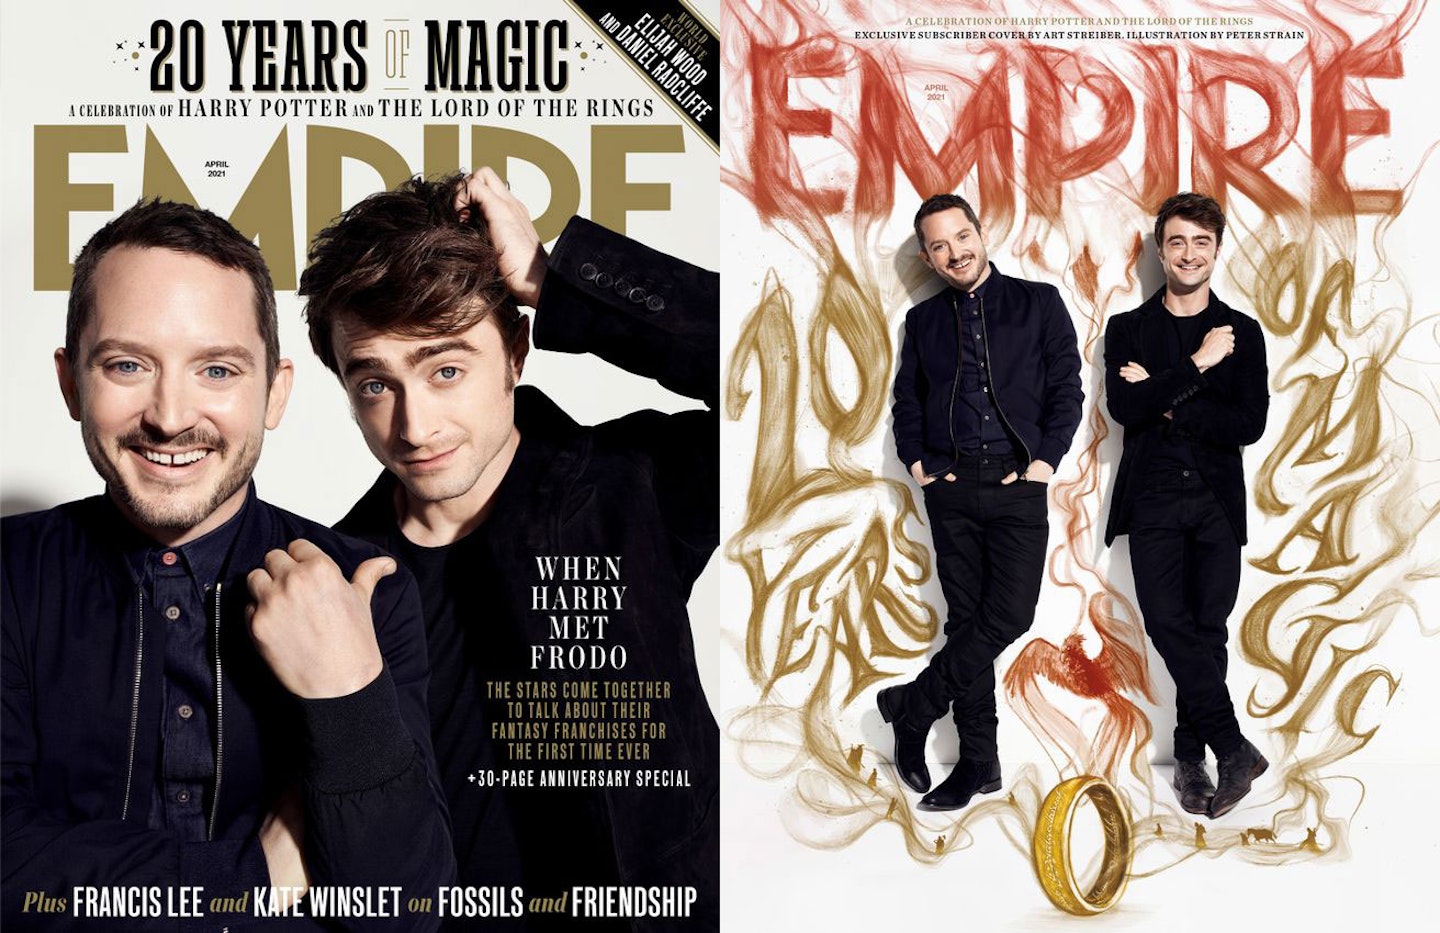 Radcliffe and Elijah Wood on the cover of Empire